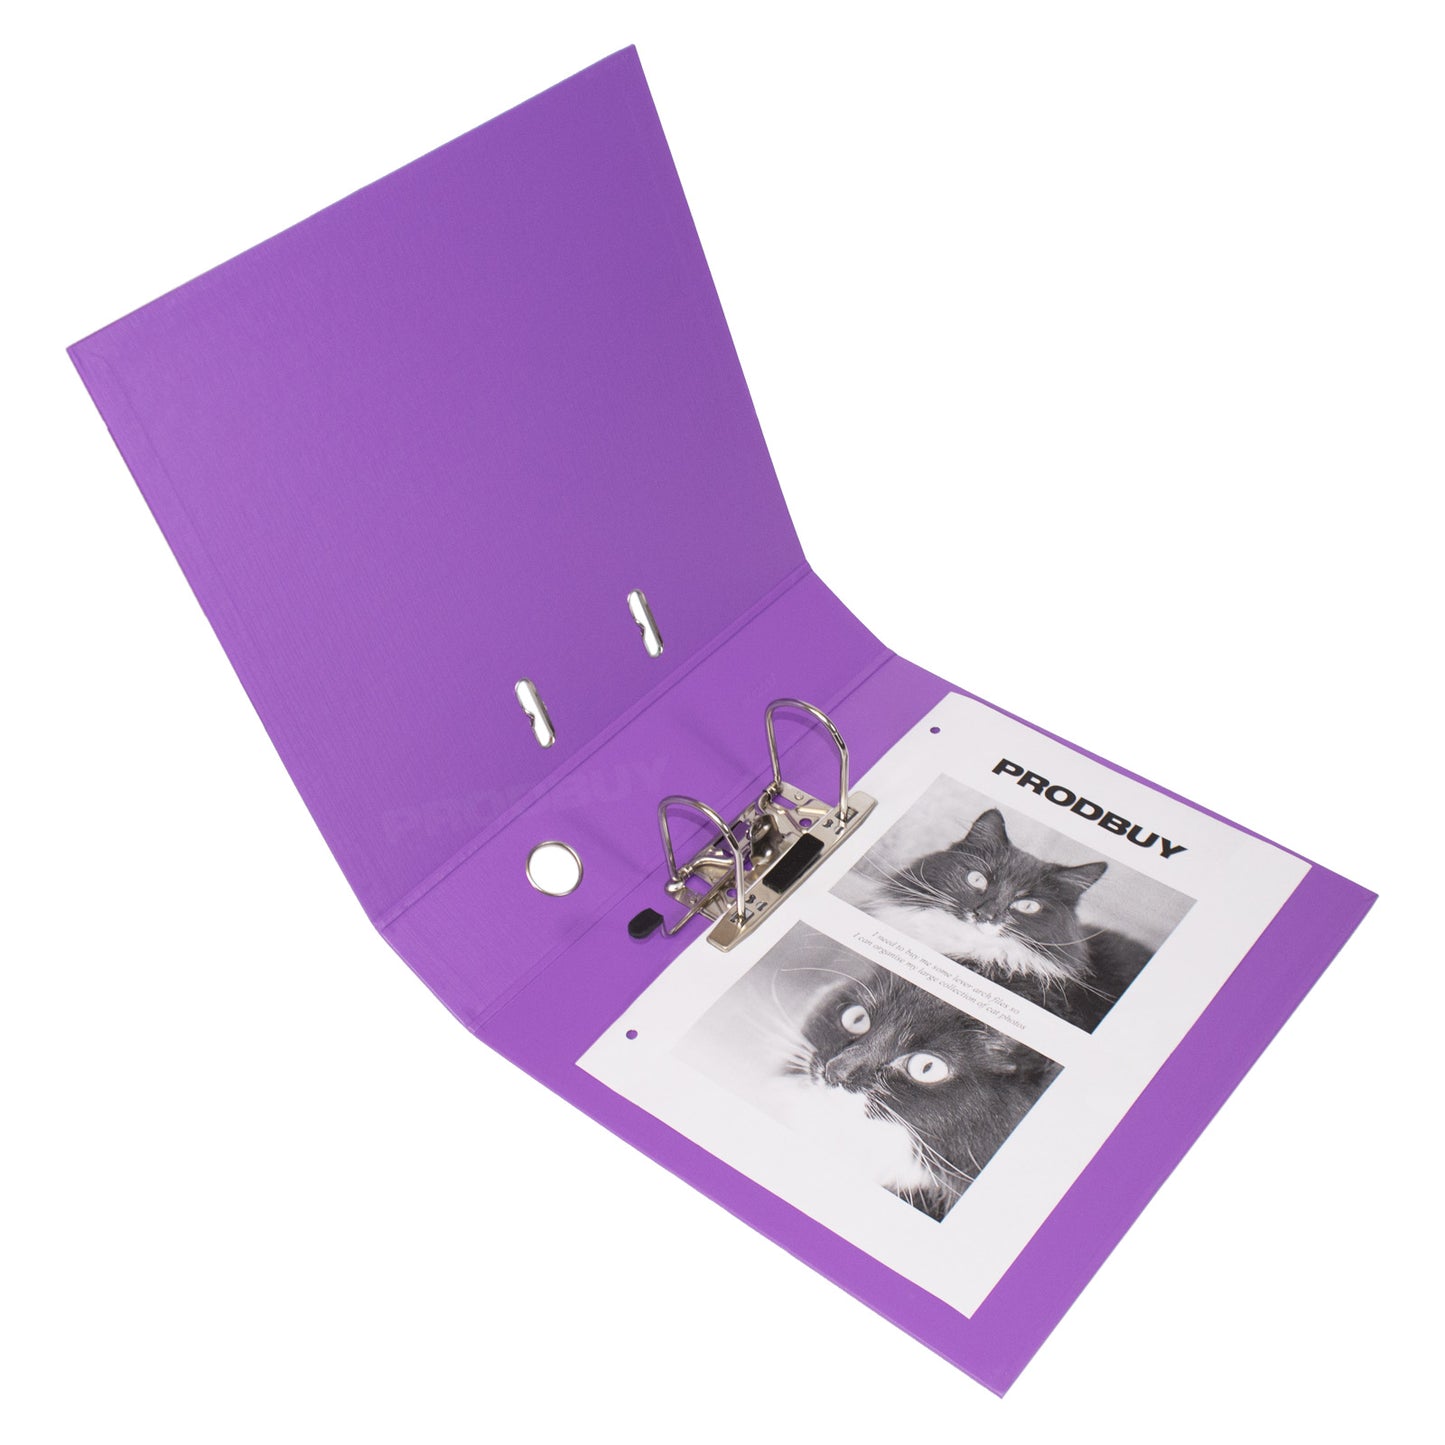 Set of 3 Lever Arch Files A4 70mm PVC with Purple Colour